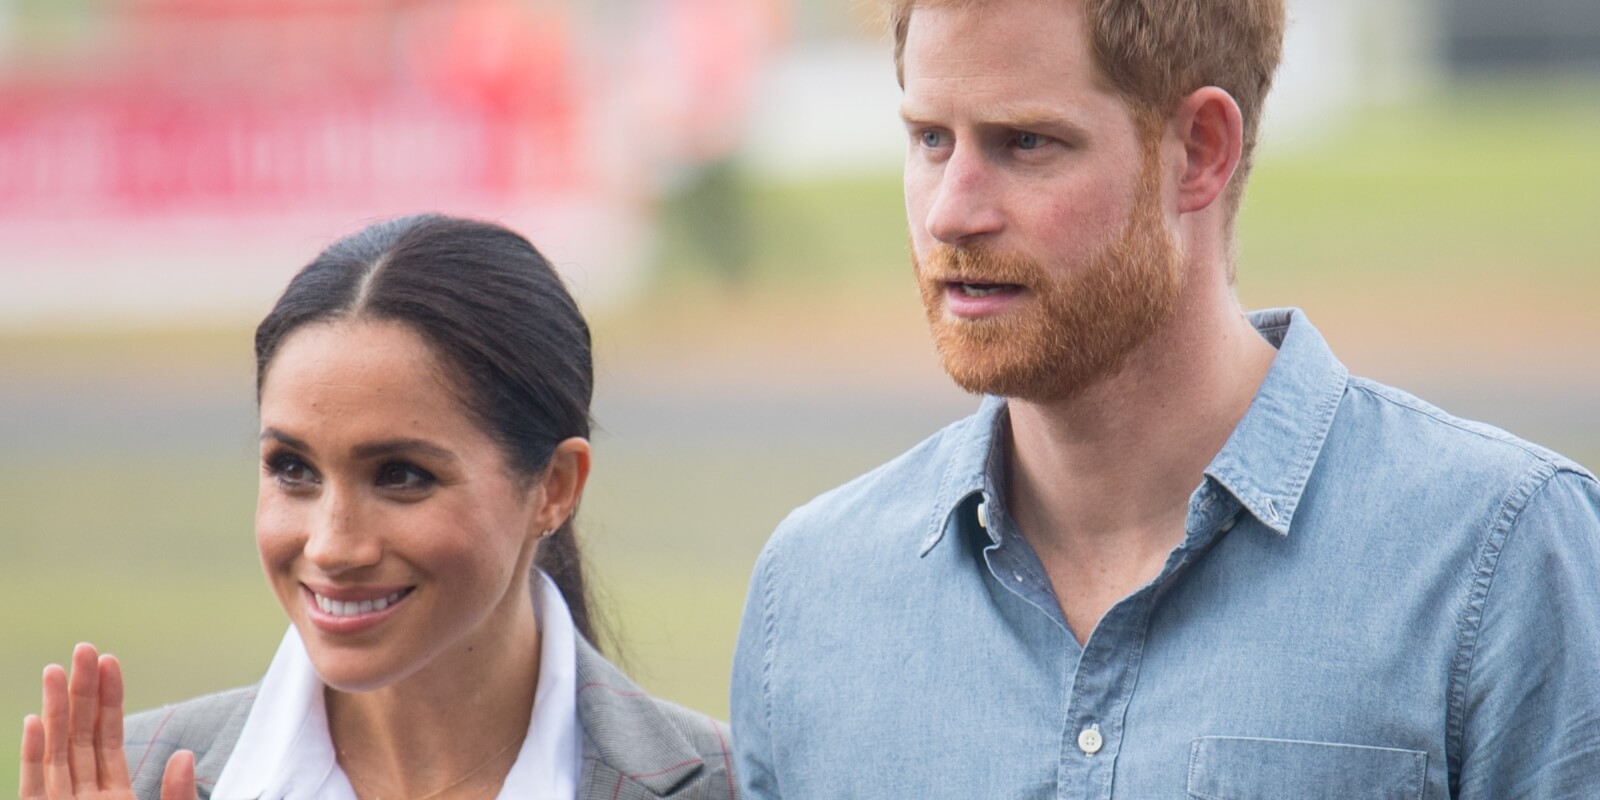 Prince Harry and Meghan Markle pose together at a naming and unveiling ceremony for the new Royal Flying Doctor Service aircraft at Dubbo Airport on October 17, 2018 in Dubbo, Australia.